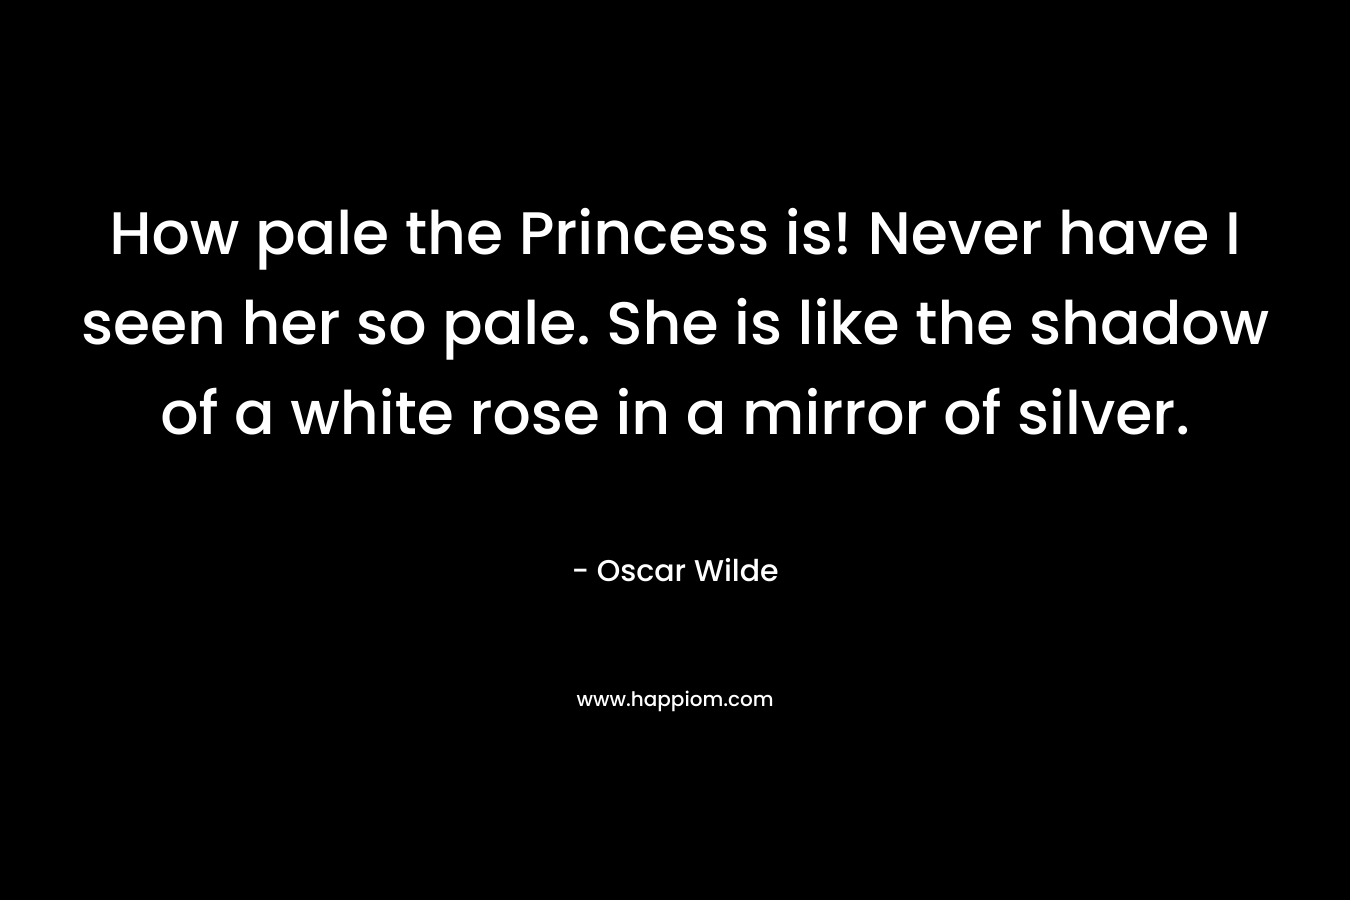 How pale the Princess is! Never have I seen her so pale. She is like the shadow of a white rose in a mirror of silver.